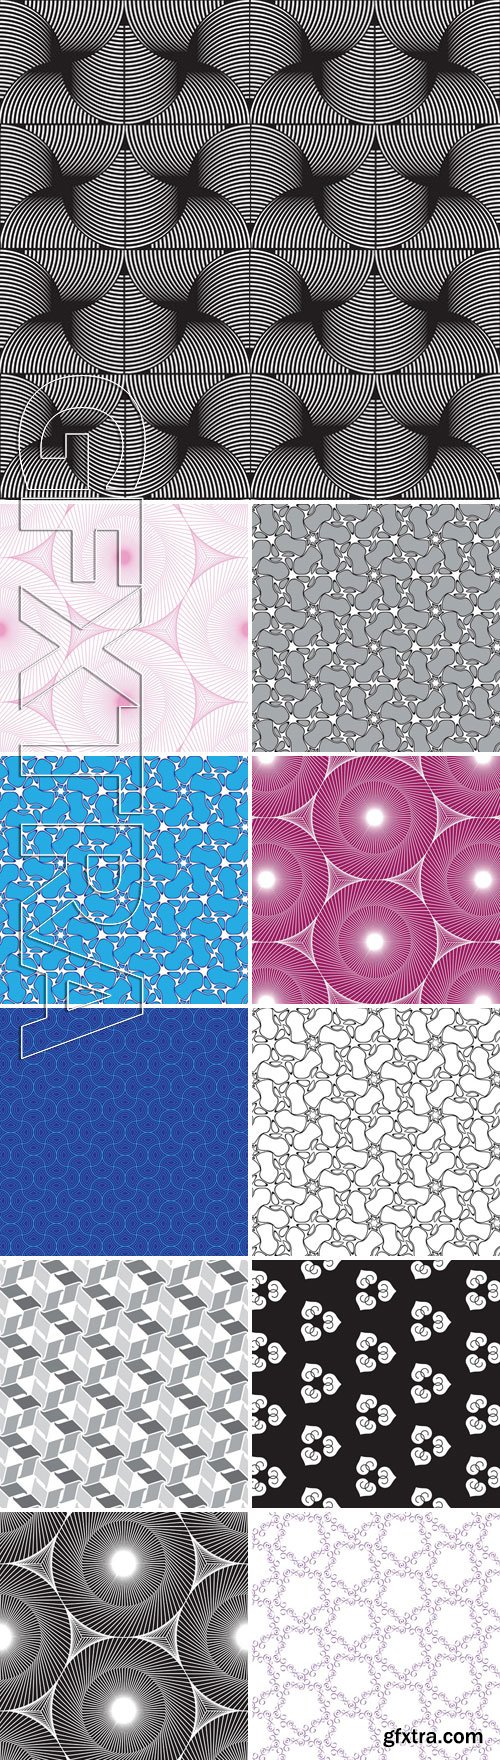 Stock Vectors - Graphic Pattern Abstract Vector Background